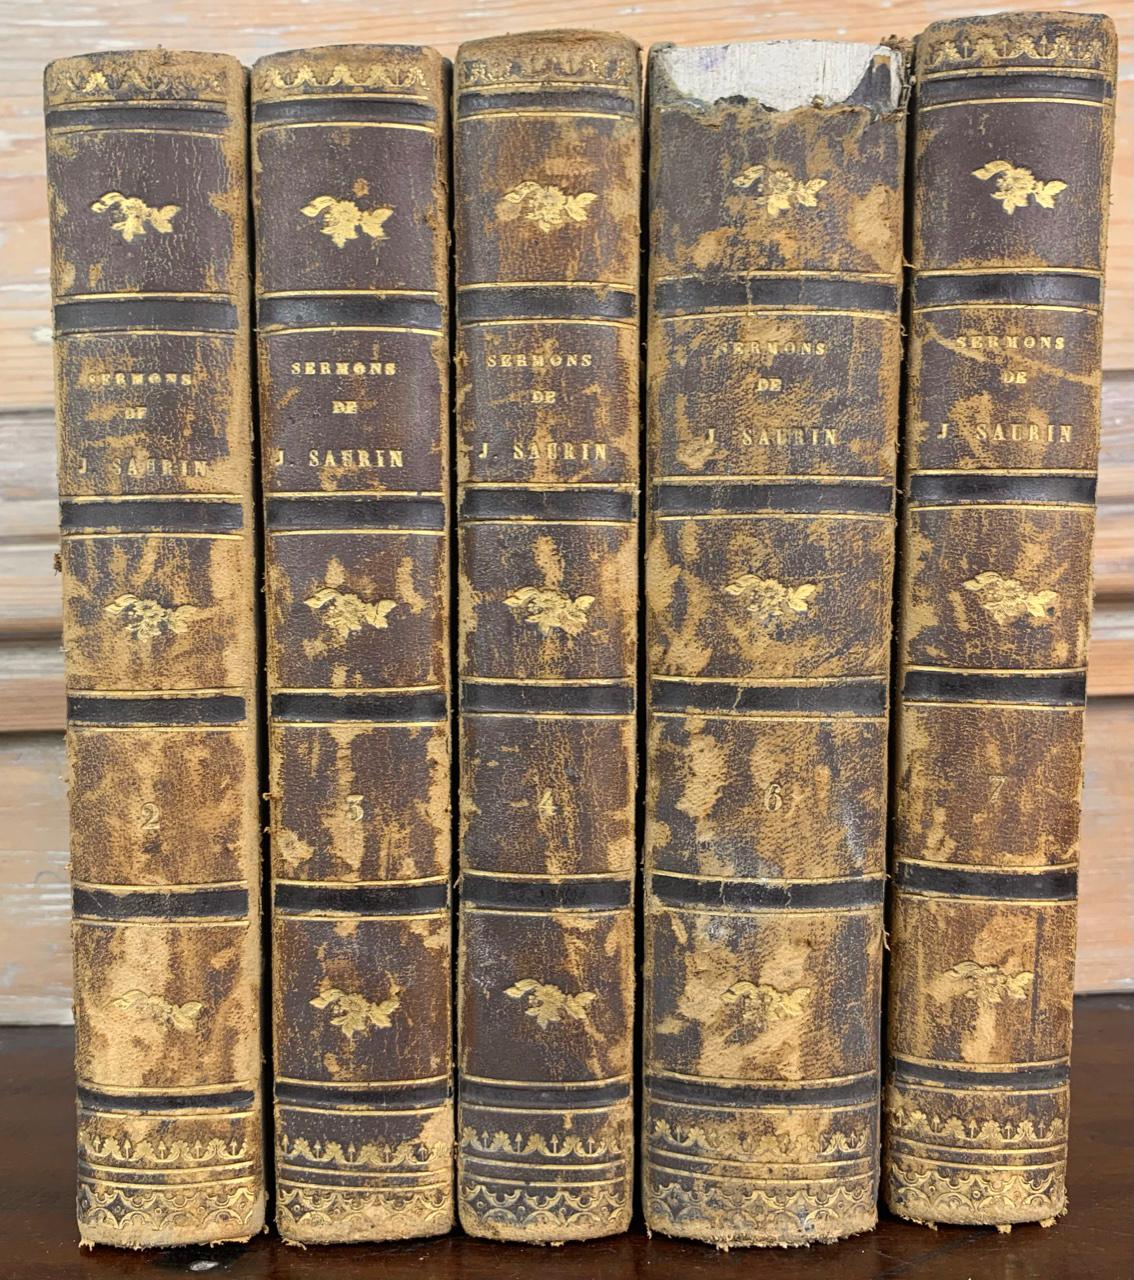 Set of old bound books dating from the 19th century. From an old protestant library near Le Havre in France. These beautiful books are perfect to fill a nice library. Sizes may vary. This series is entitled 